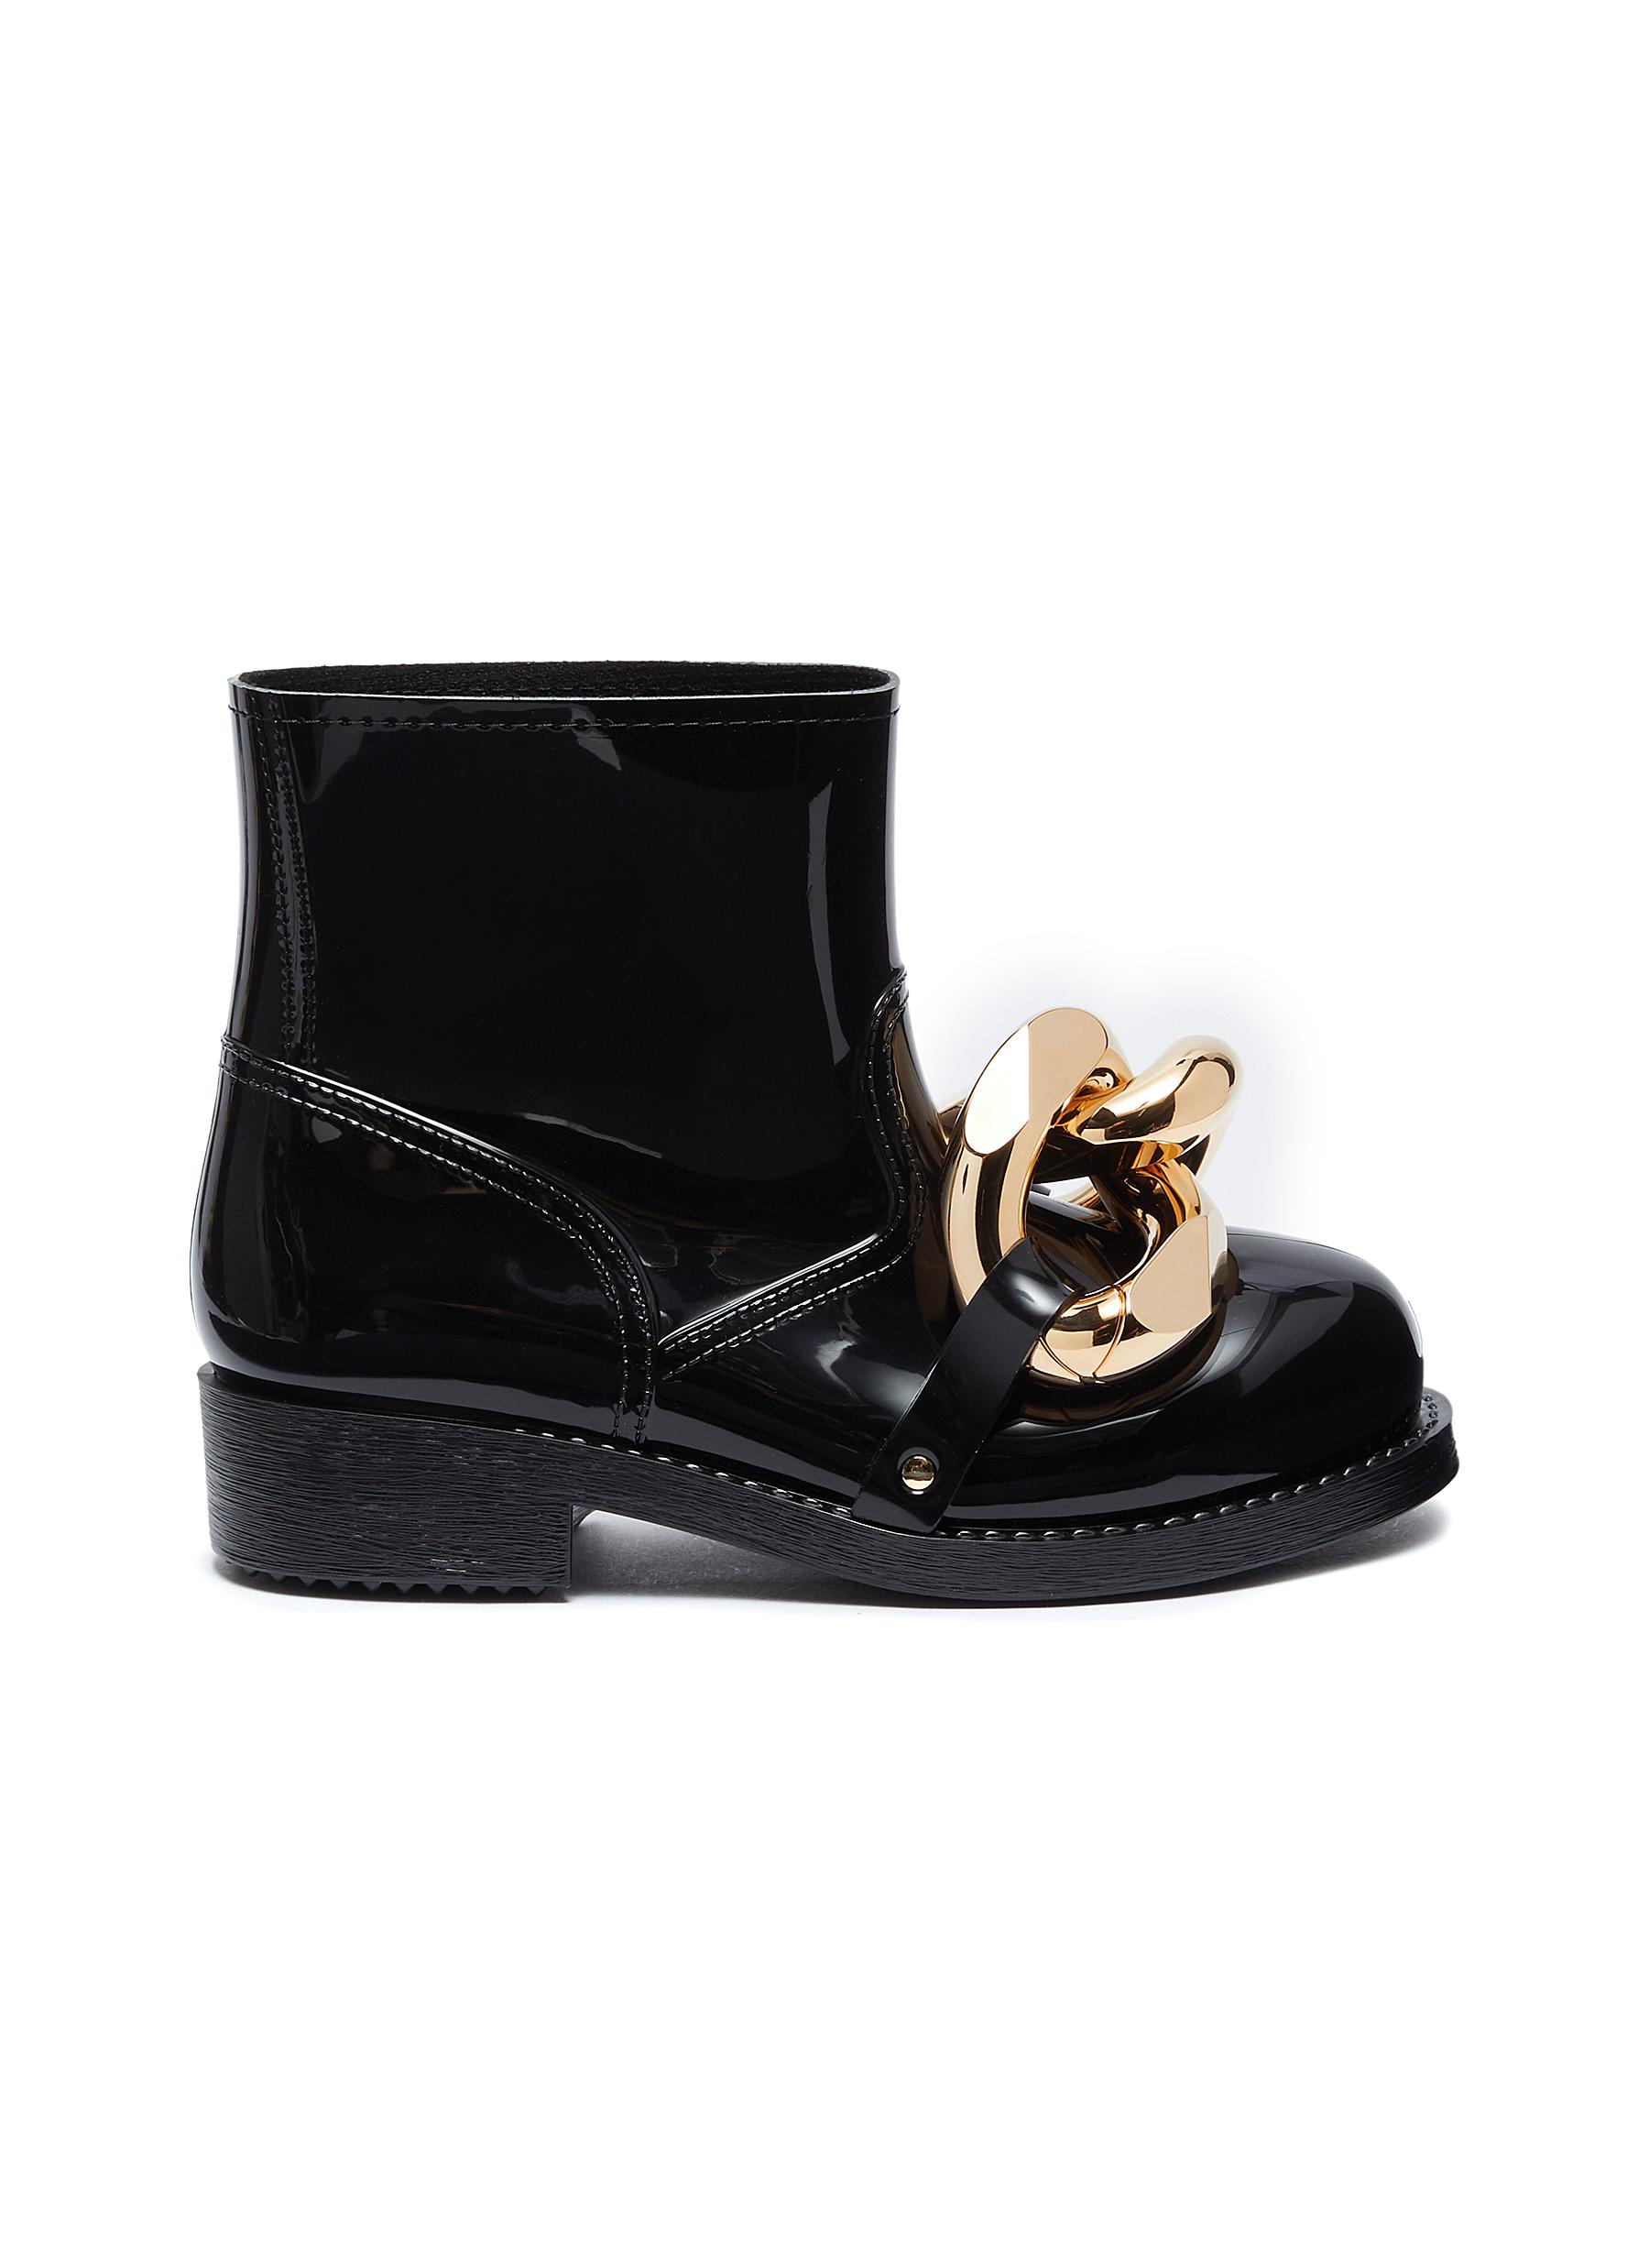 JW ANDERSON Chain Rubber Boots